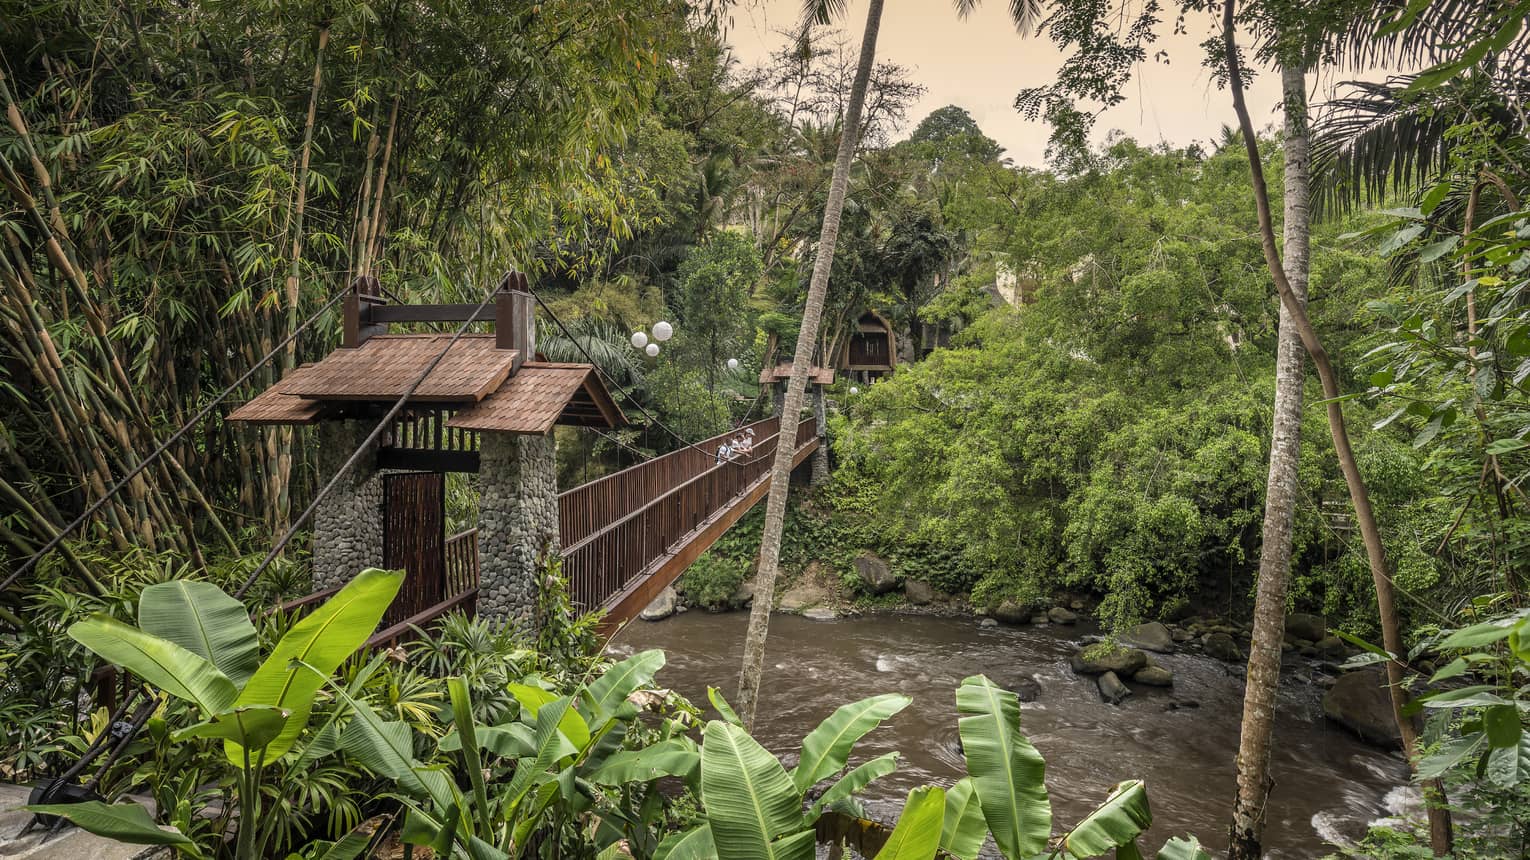 Sayan Bridge in Bali is surrounded by lush vegetation